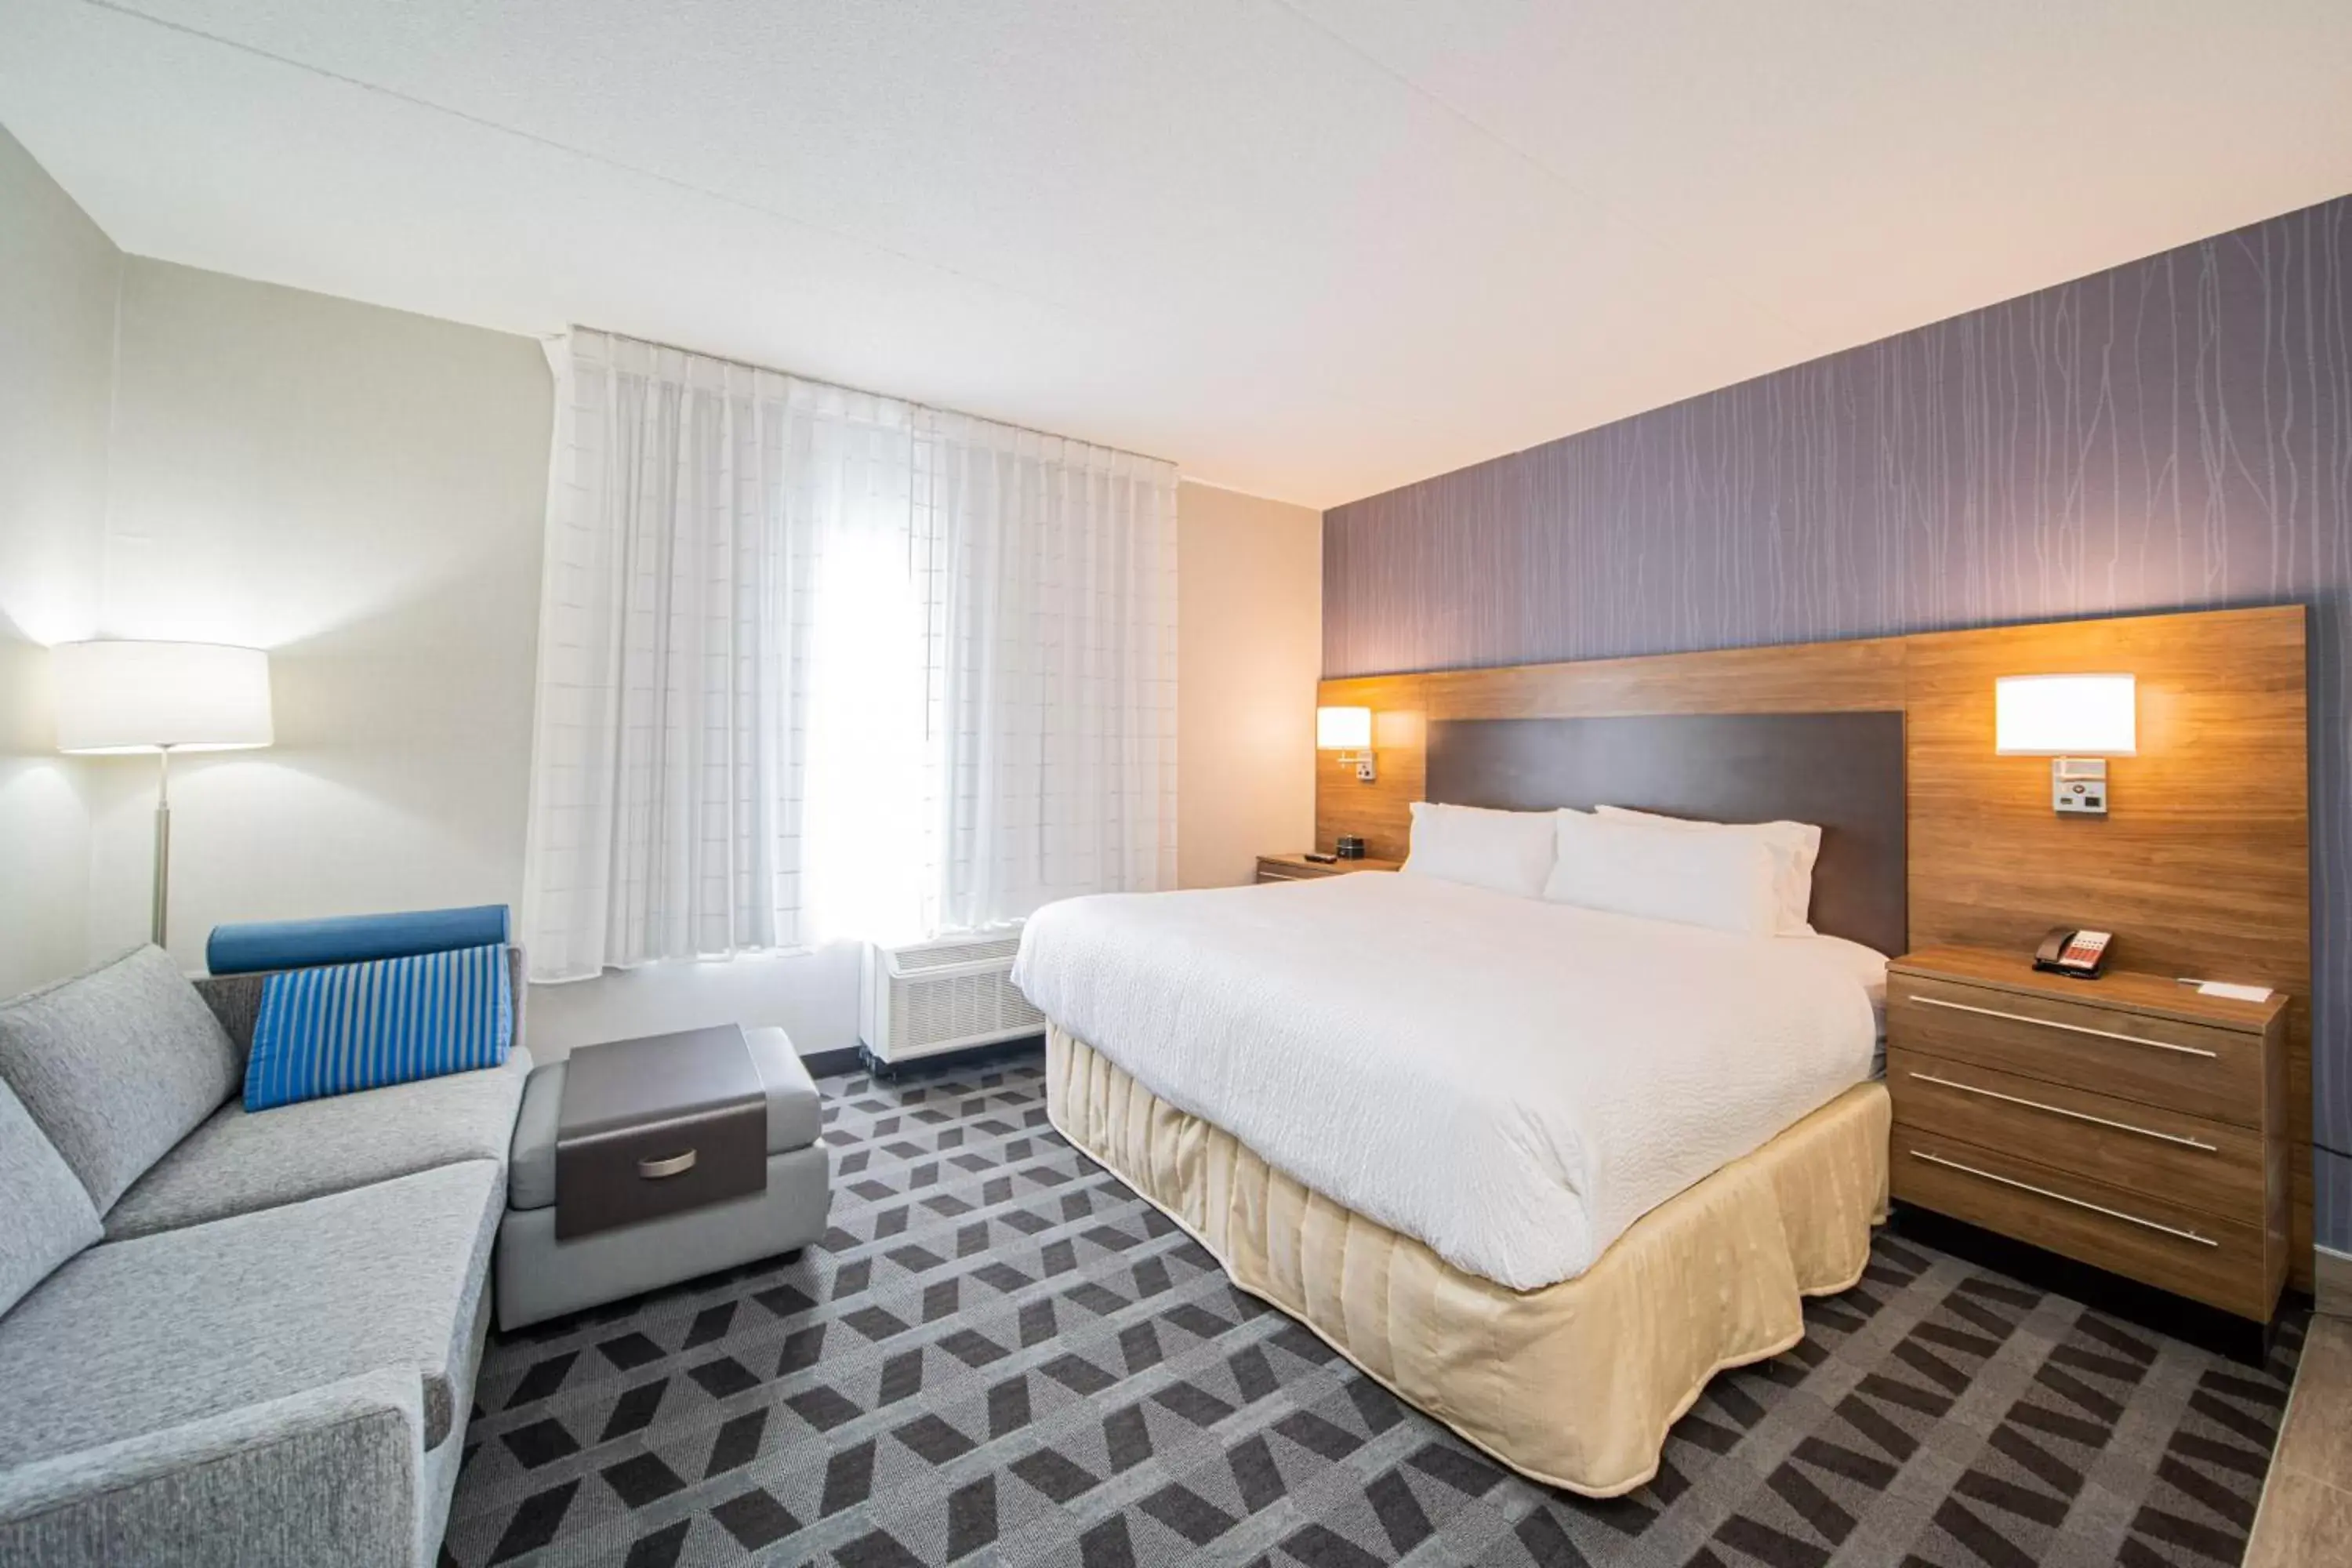 Bed, Room Photo in TownePlace Suites by Marriott Brantford and Conference Centre